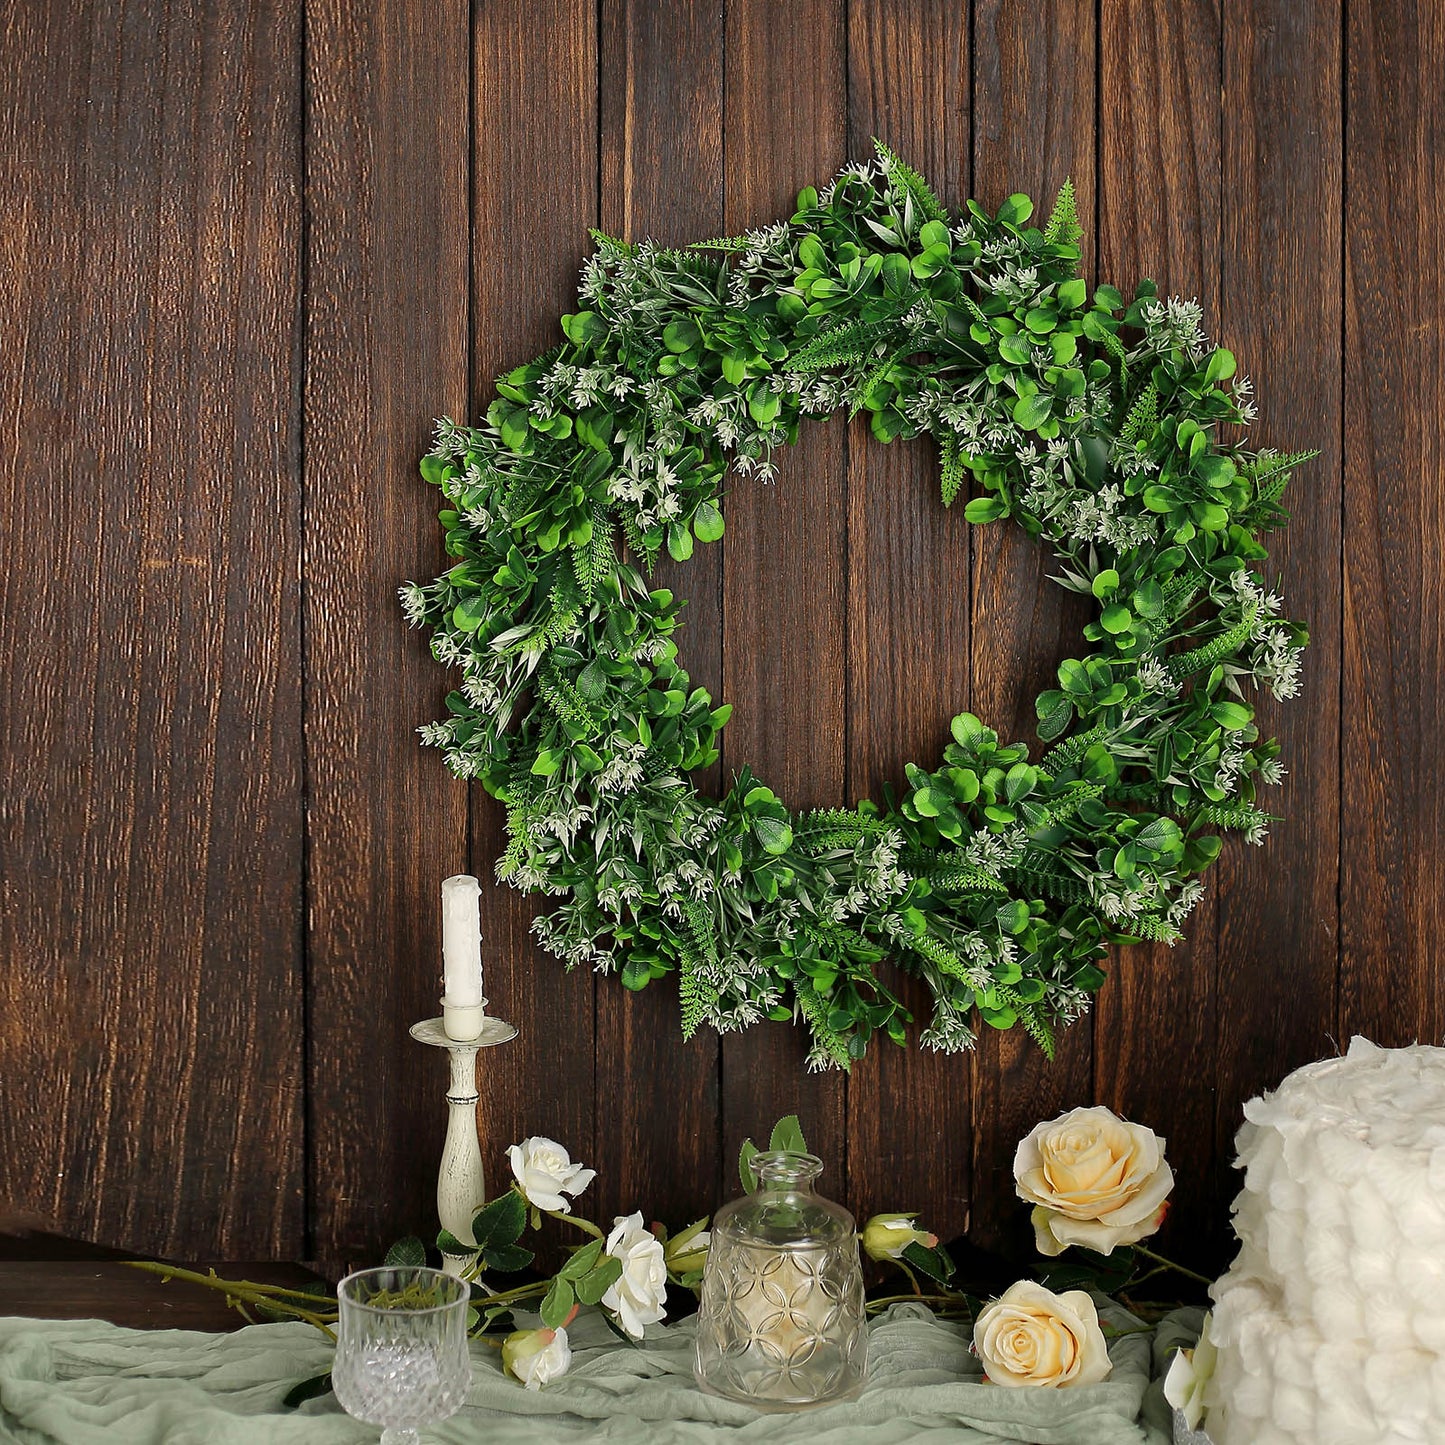 2 Pack White/Green Artificial Lifelike Boxwood Fern Mix Spring Wreaths 22"